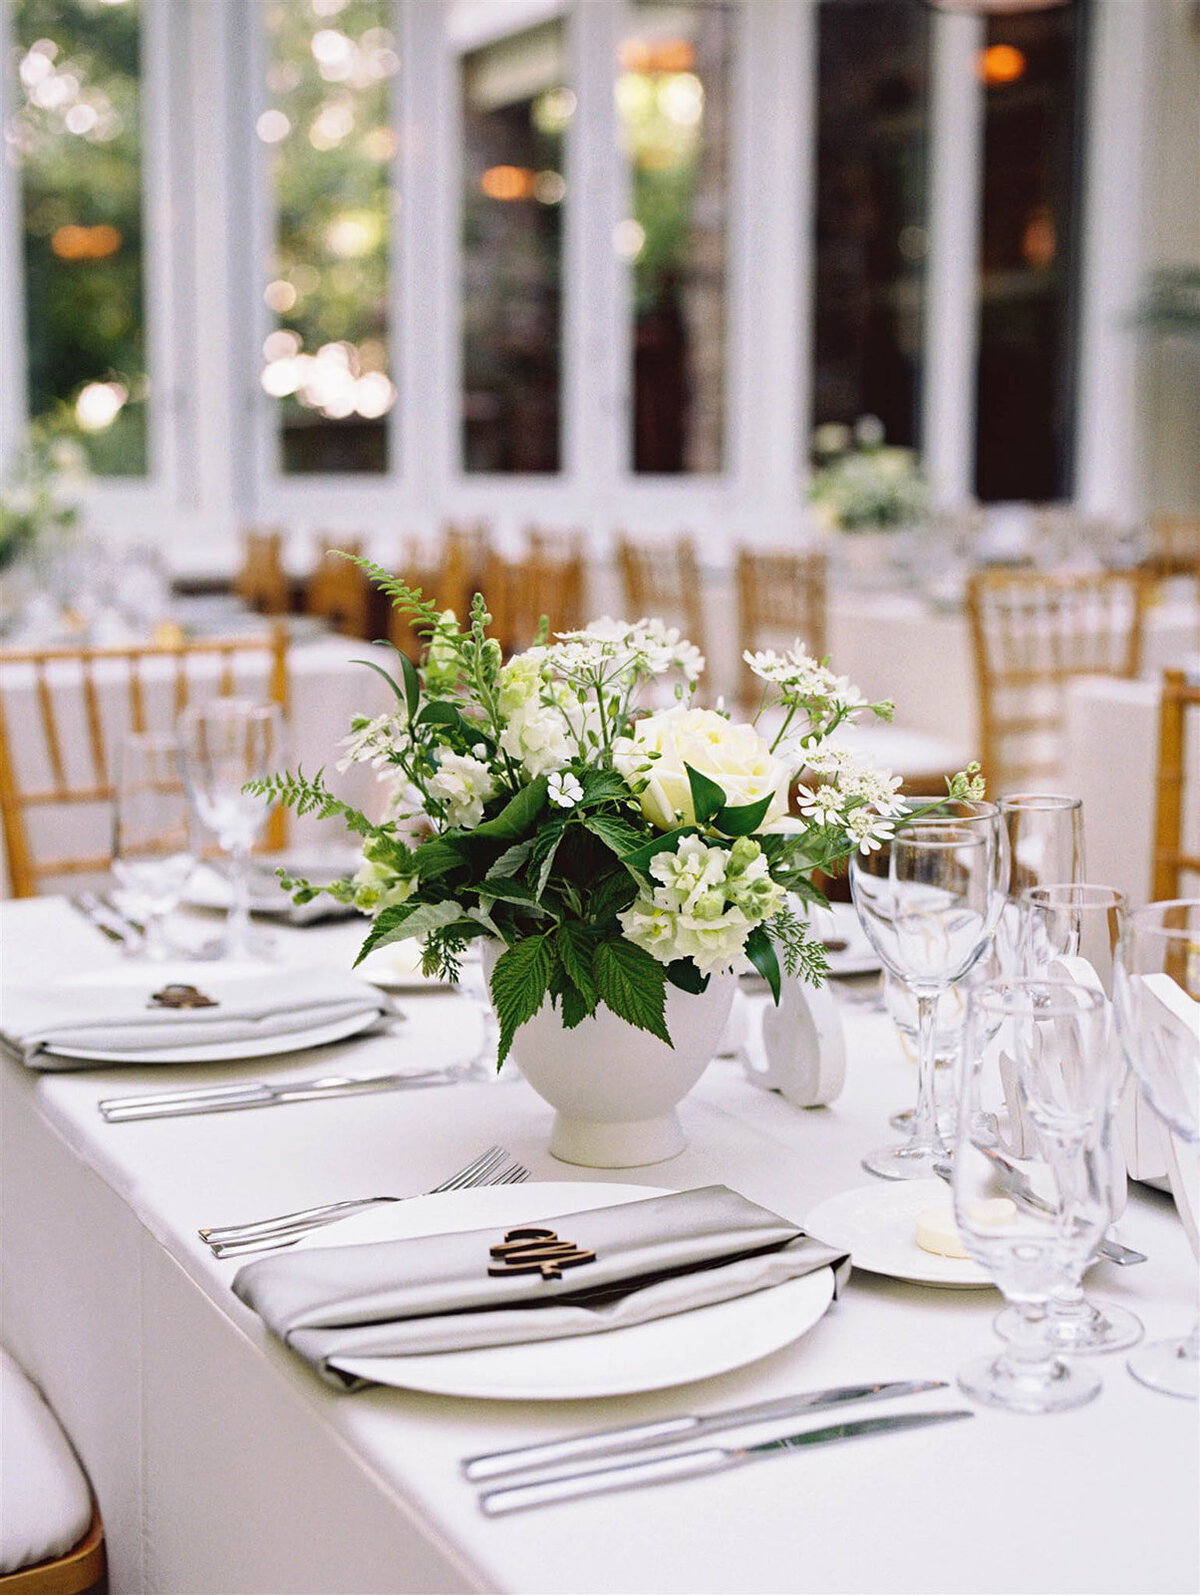 White linens and white florals adorn a table for wedding reception